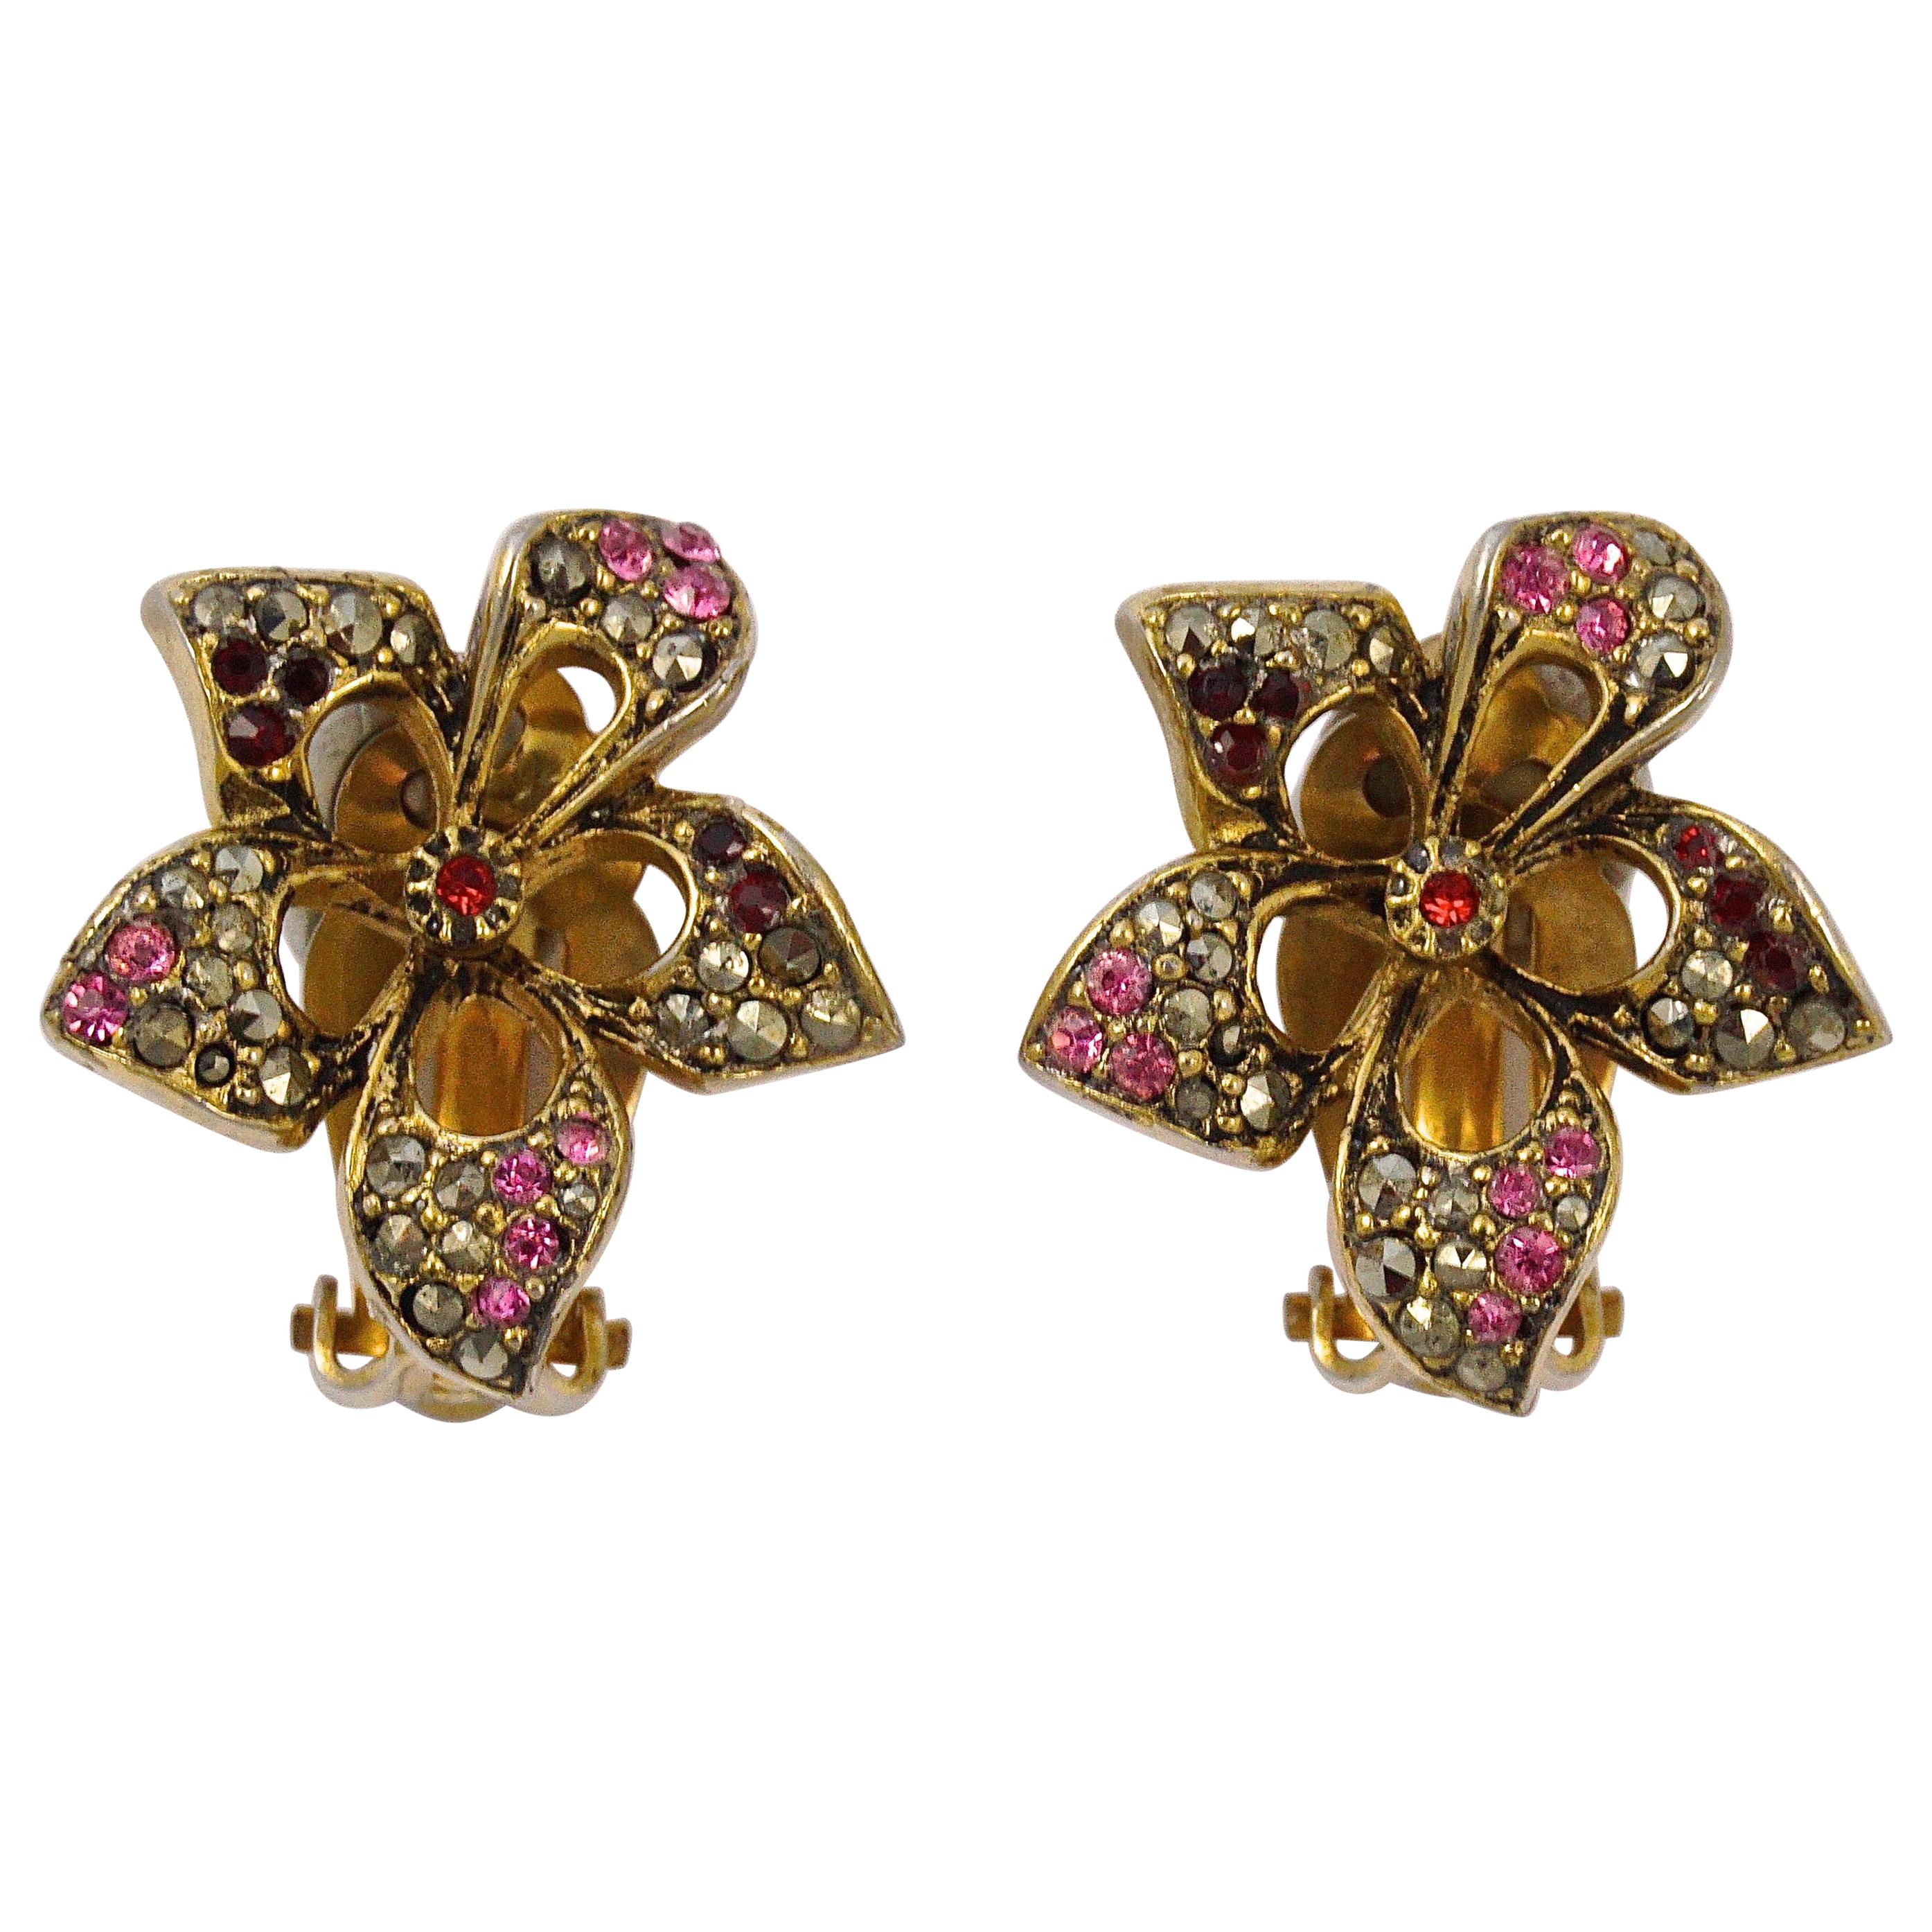 Les Bernard Gold Plated Flower Earrings with Marcasites Red Pink Rhinestones